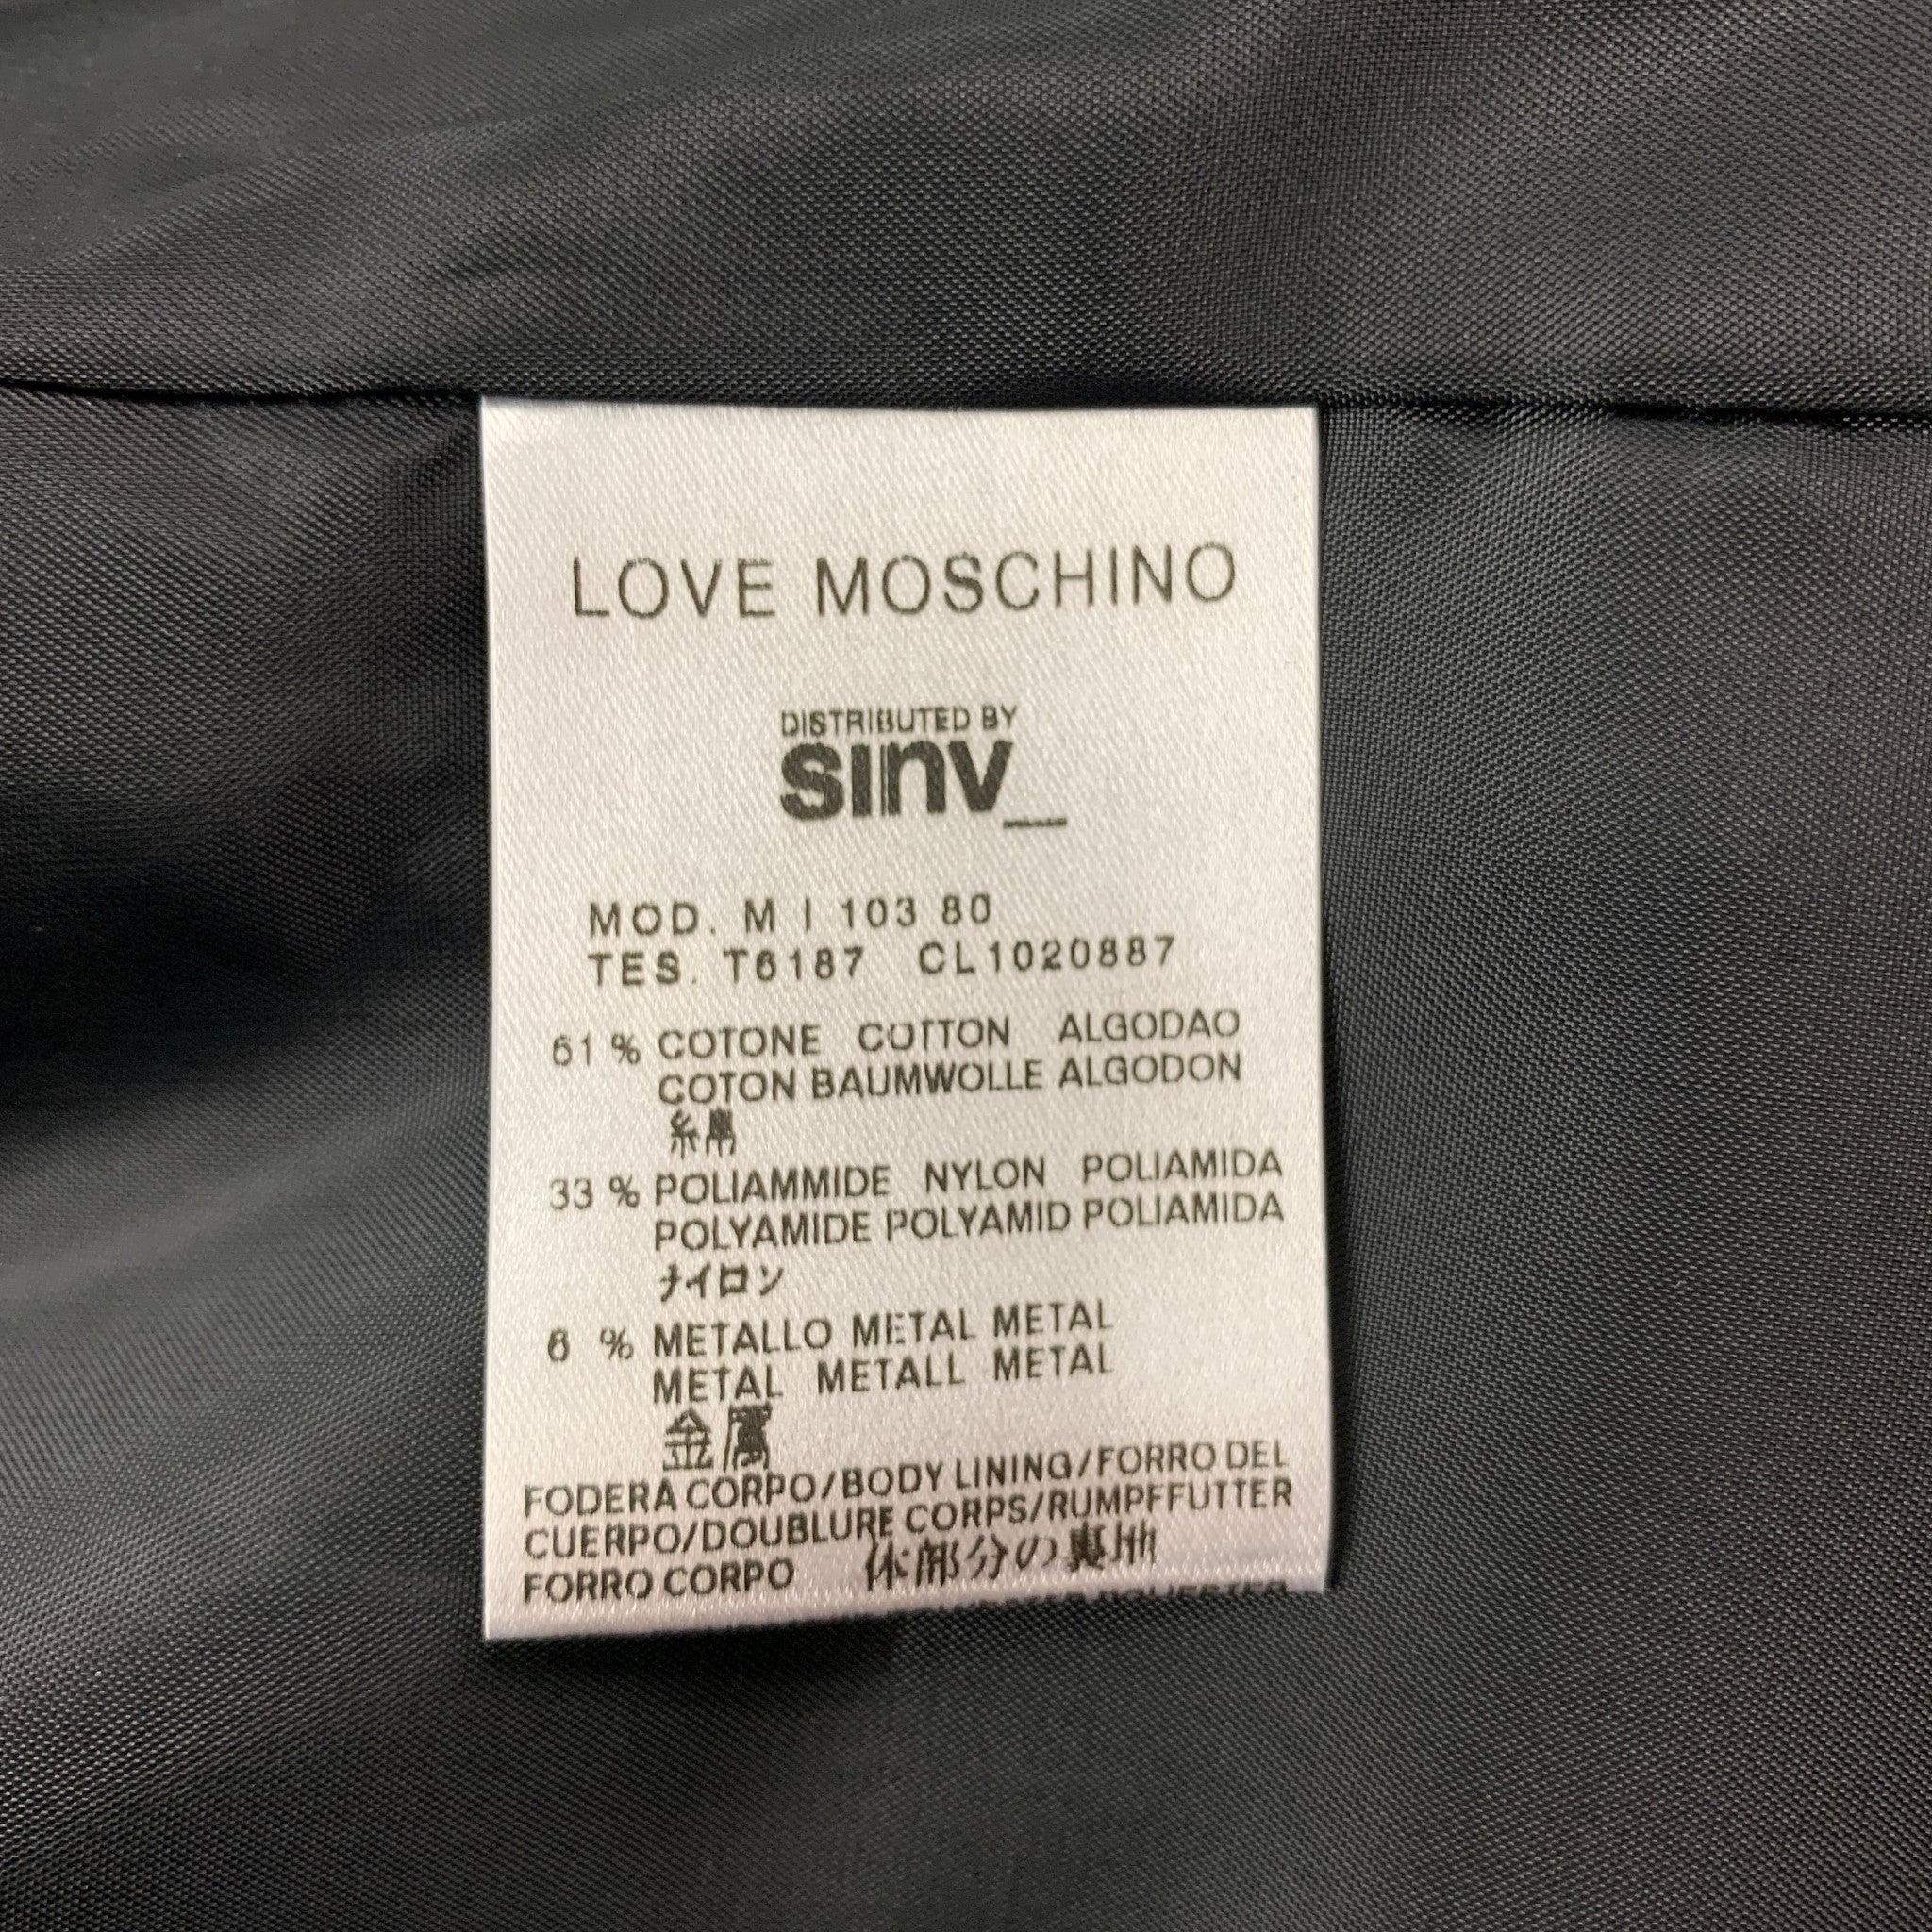 LOVE MOSCHINO Black Wrinkled Cotton Blend Notch Lapel Sport Coat For Sale 2